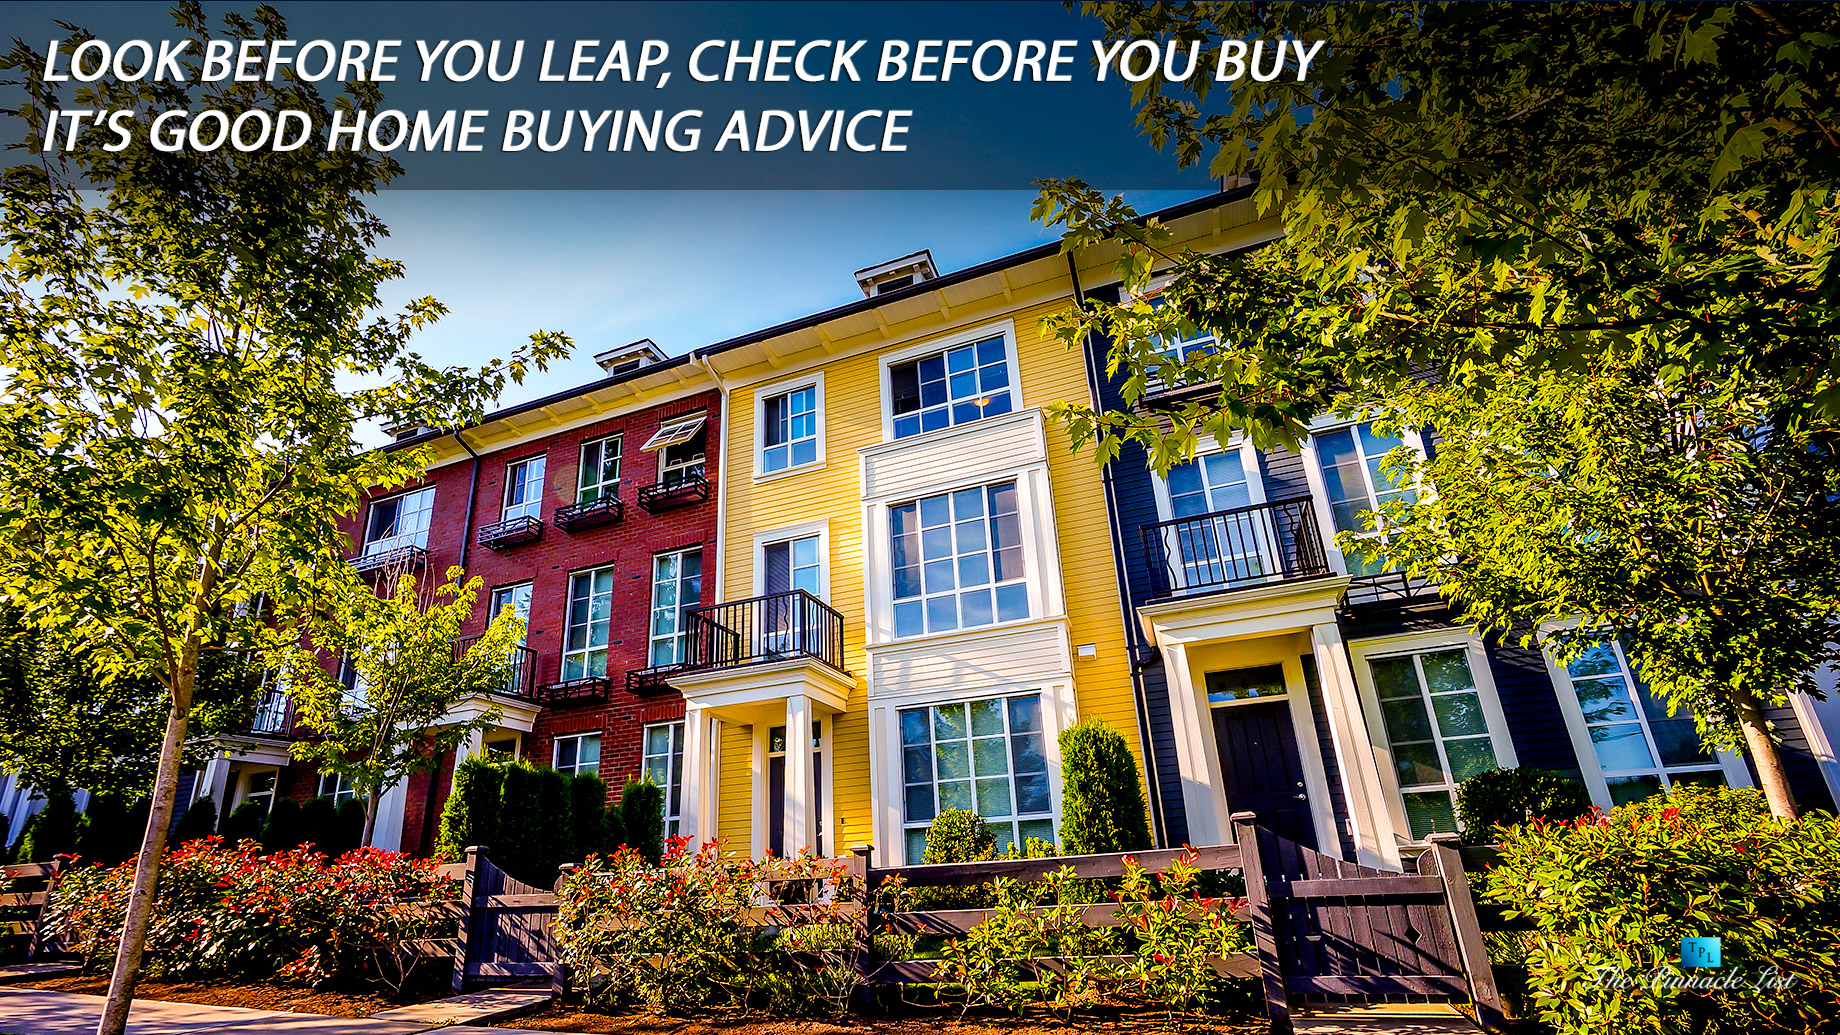 Look Before You Leap, Check Before You Buy - It's Good Home Buying Advice